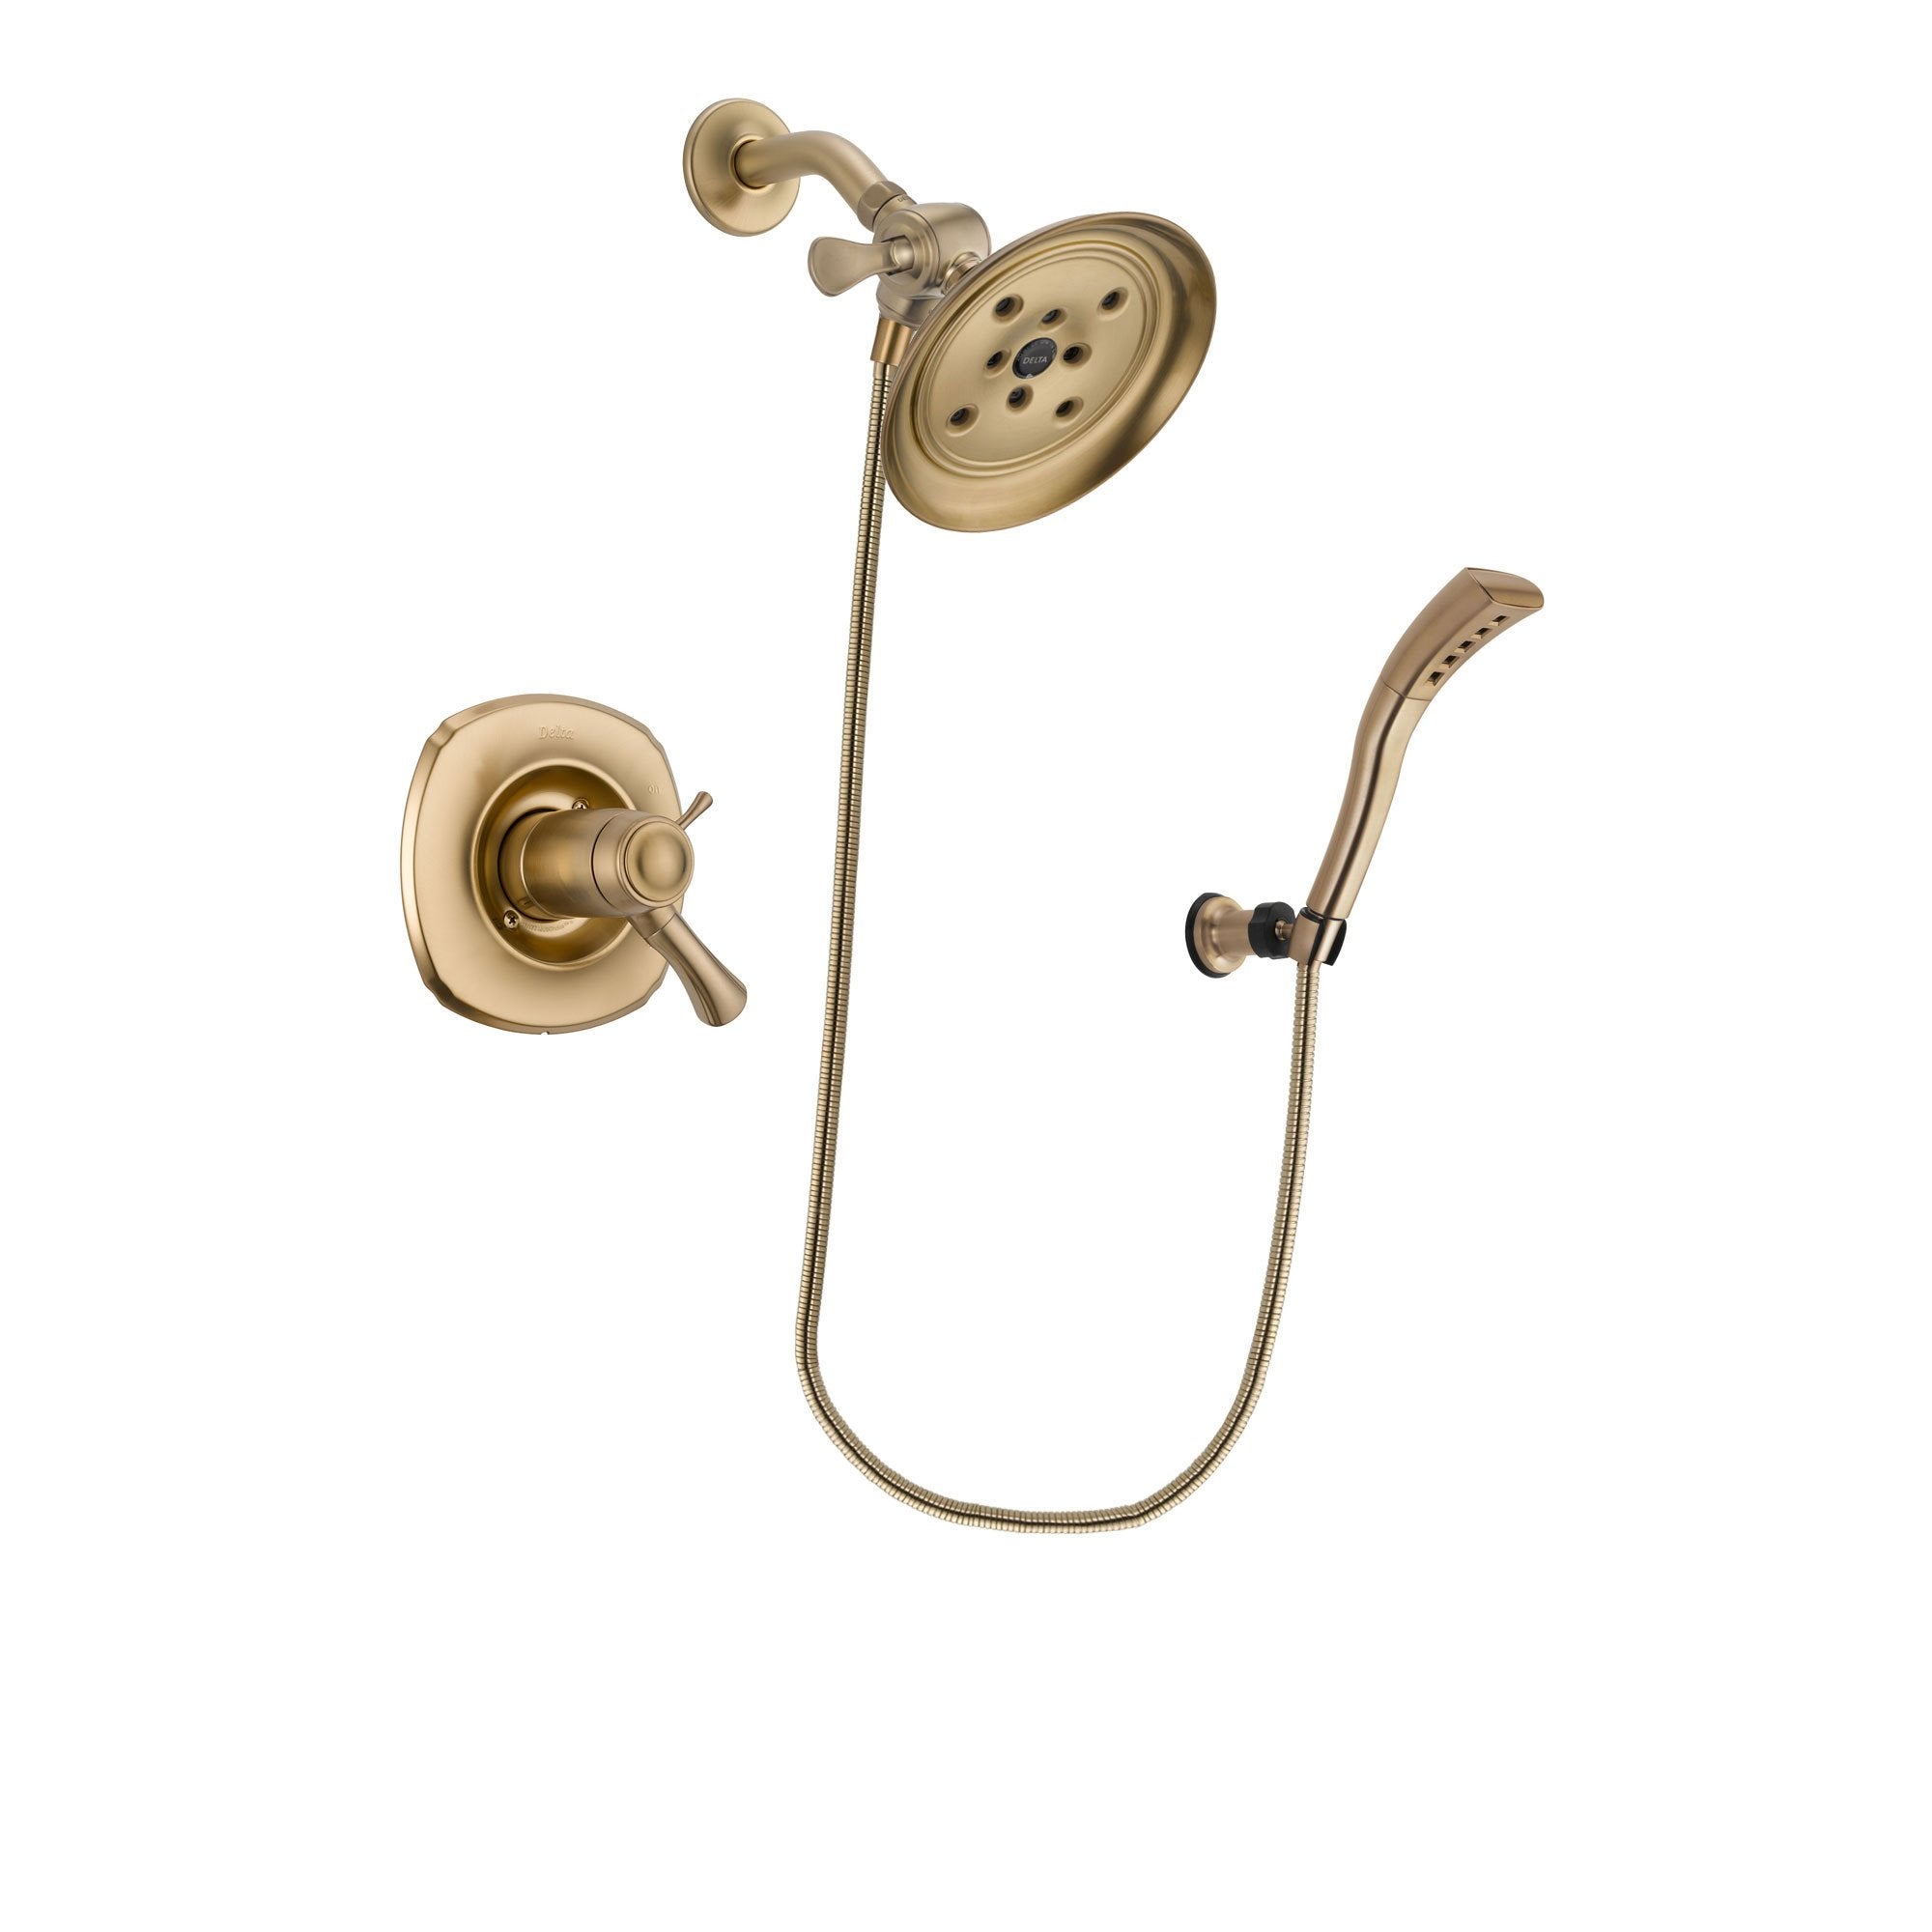 Delta Addison Champagne Bronze Finish Thermostatic Shower Faucet System Package with Large Rain Shower Head and Modern Wall Mount Personal Handheld Shower Spray Includes Rough-in Valve DSP3686V